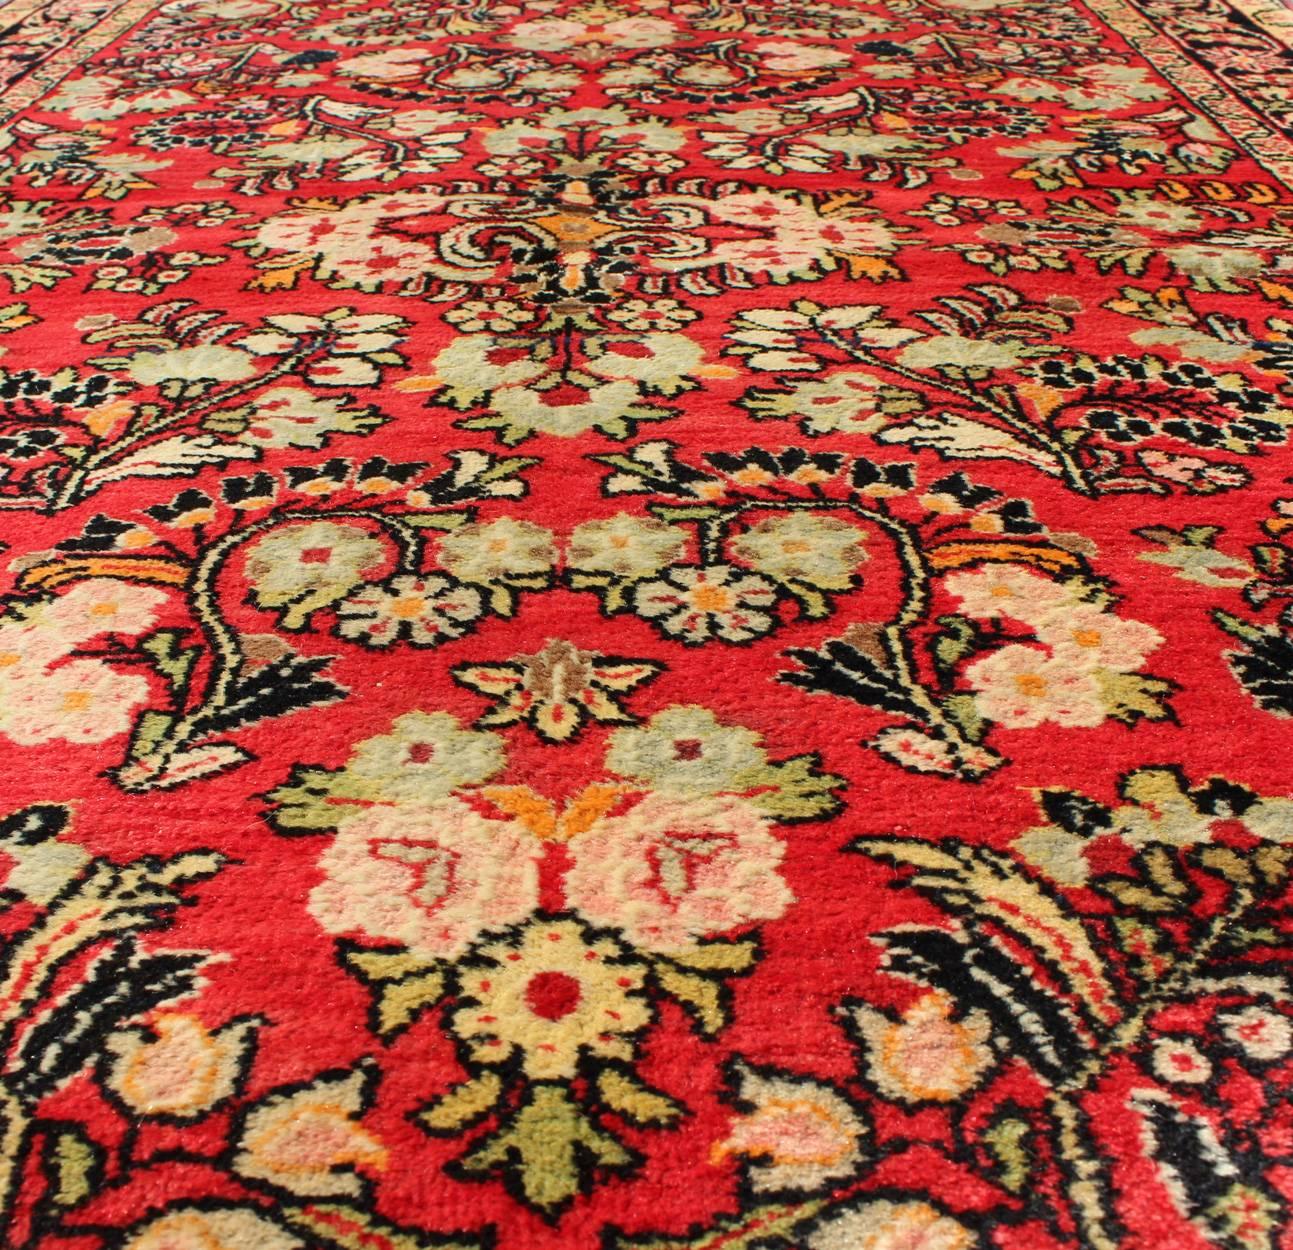 Mid-20th Century Vintage Persian Sarouk Rug with All-Over Floral Design in Rich Red, Onyx Black For Sale